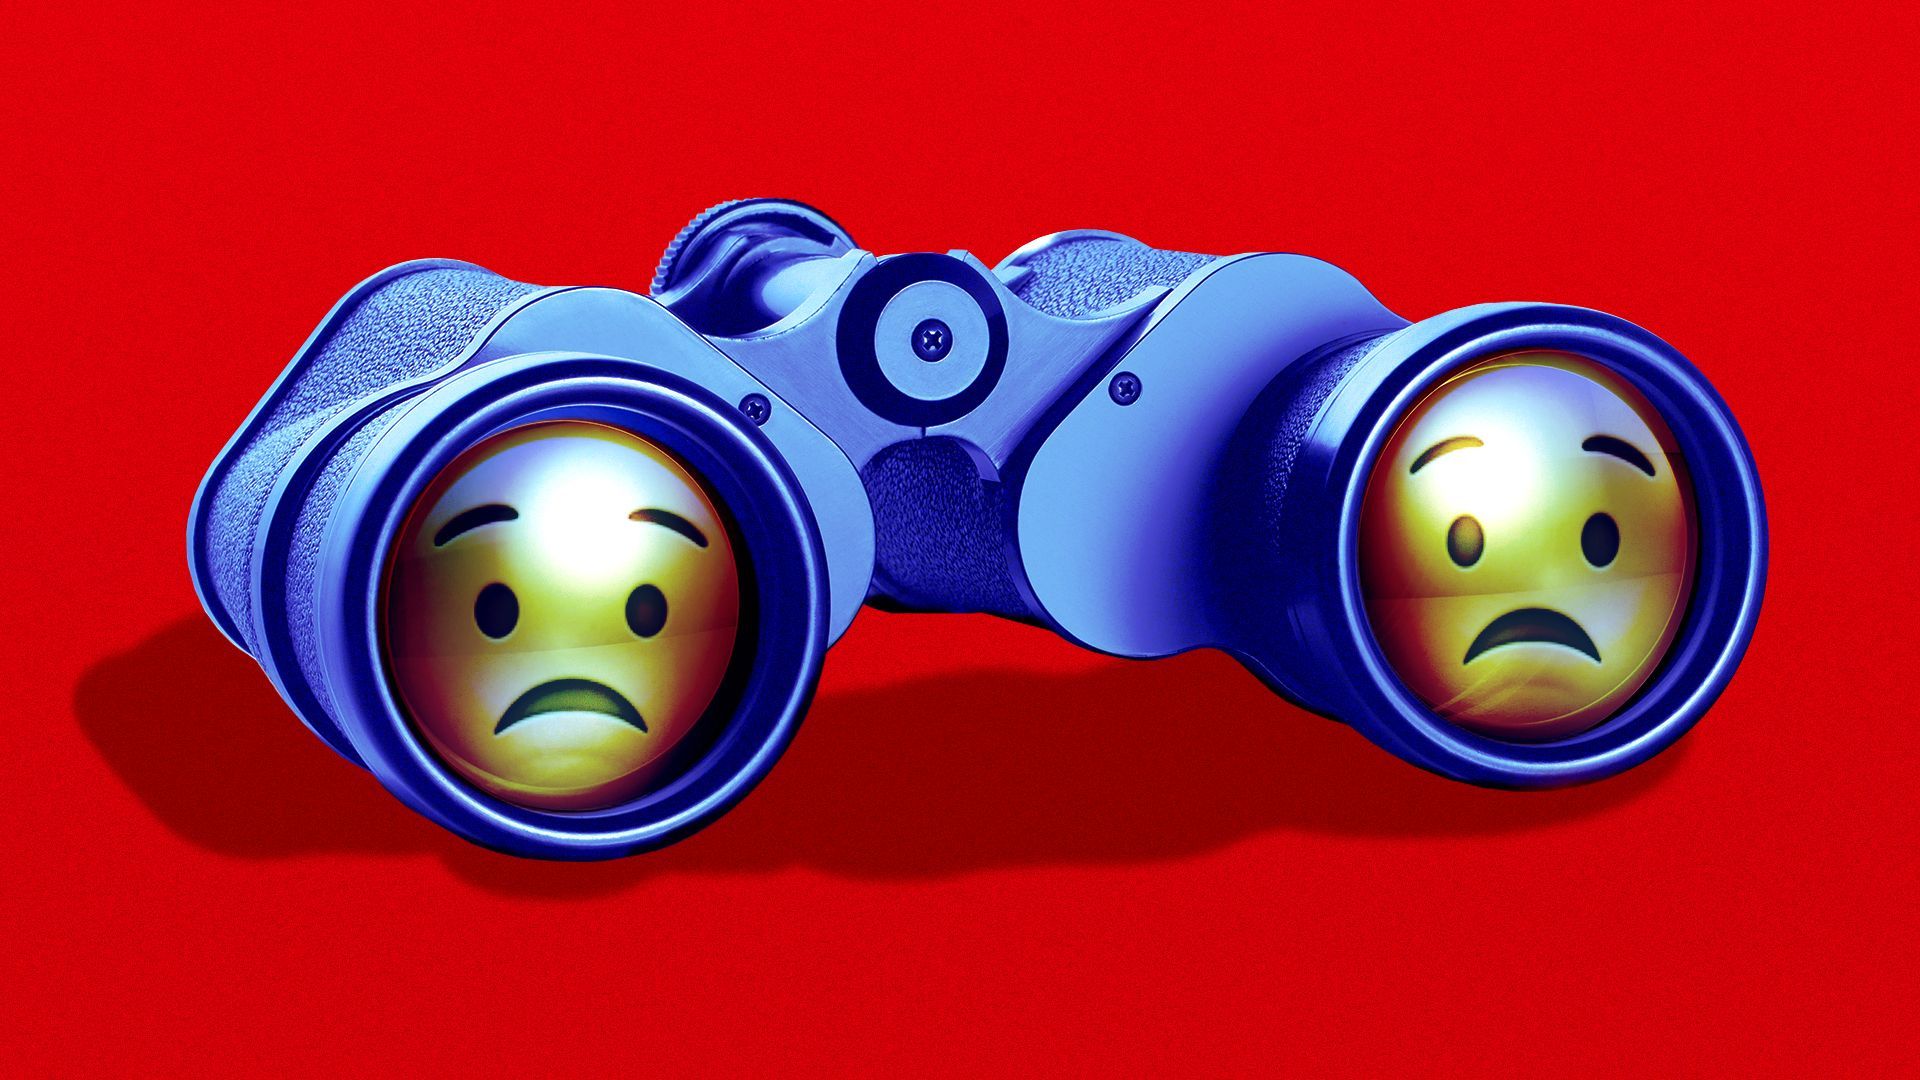 Illustration of binoculars with sad face emojis reflected in the lenses.